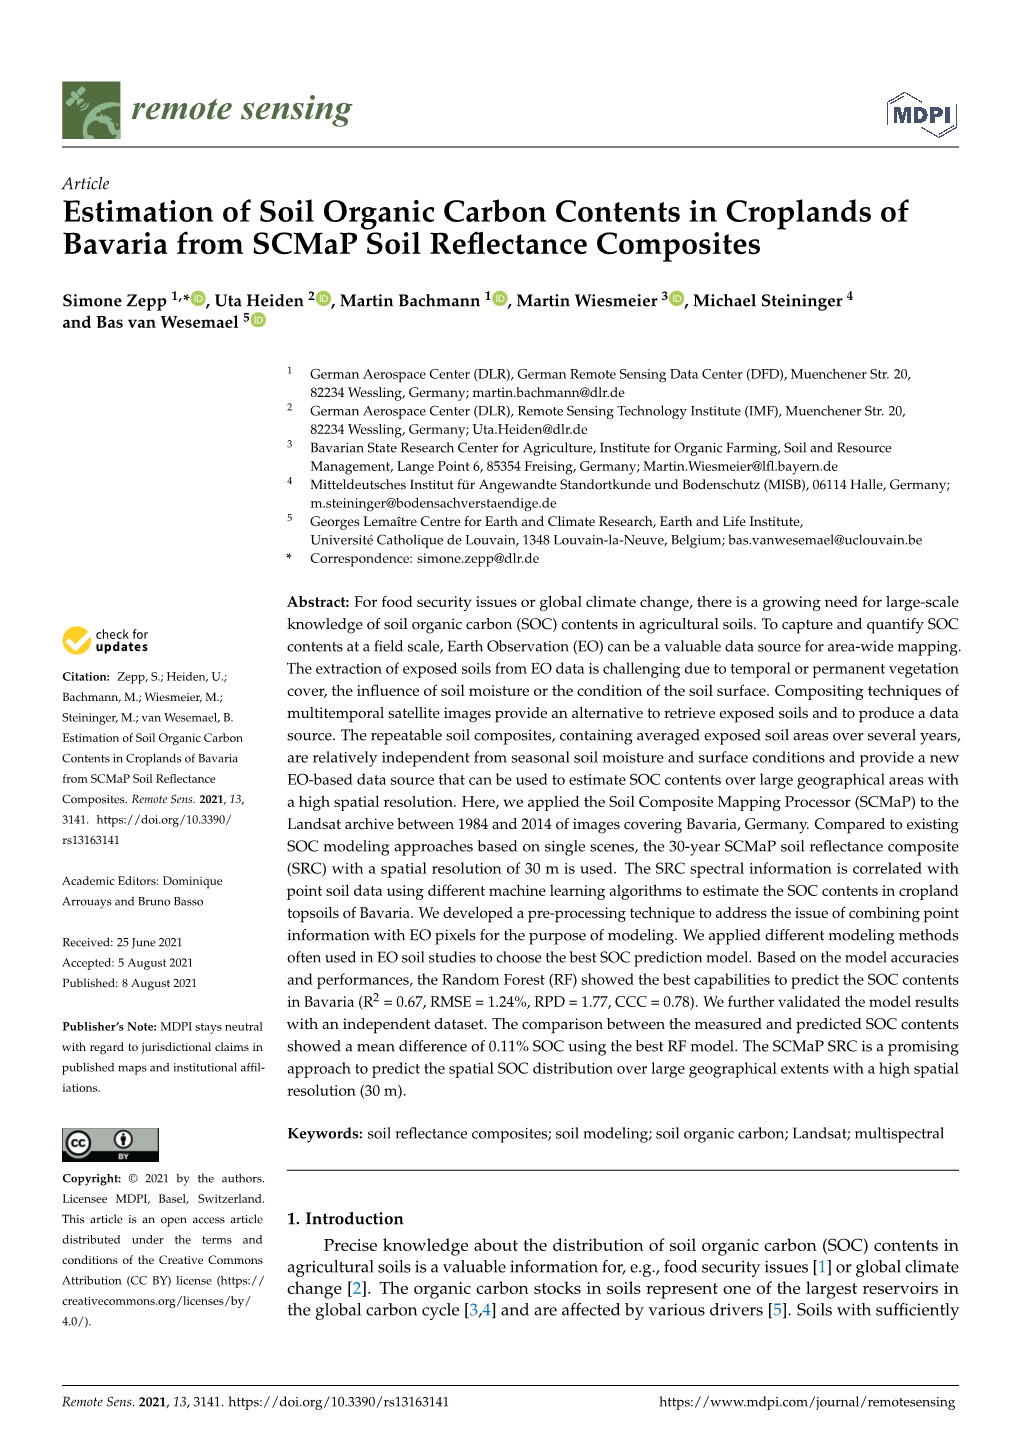 Estimation of Soil Organic Carbon Contents in Croplands of Bavaria from Scmap Soil Reﬂectance Composites